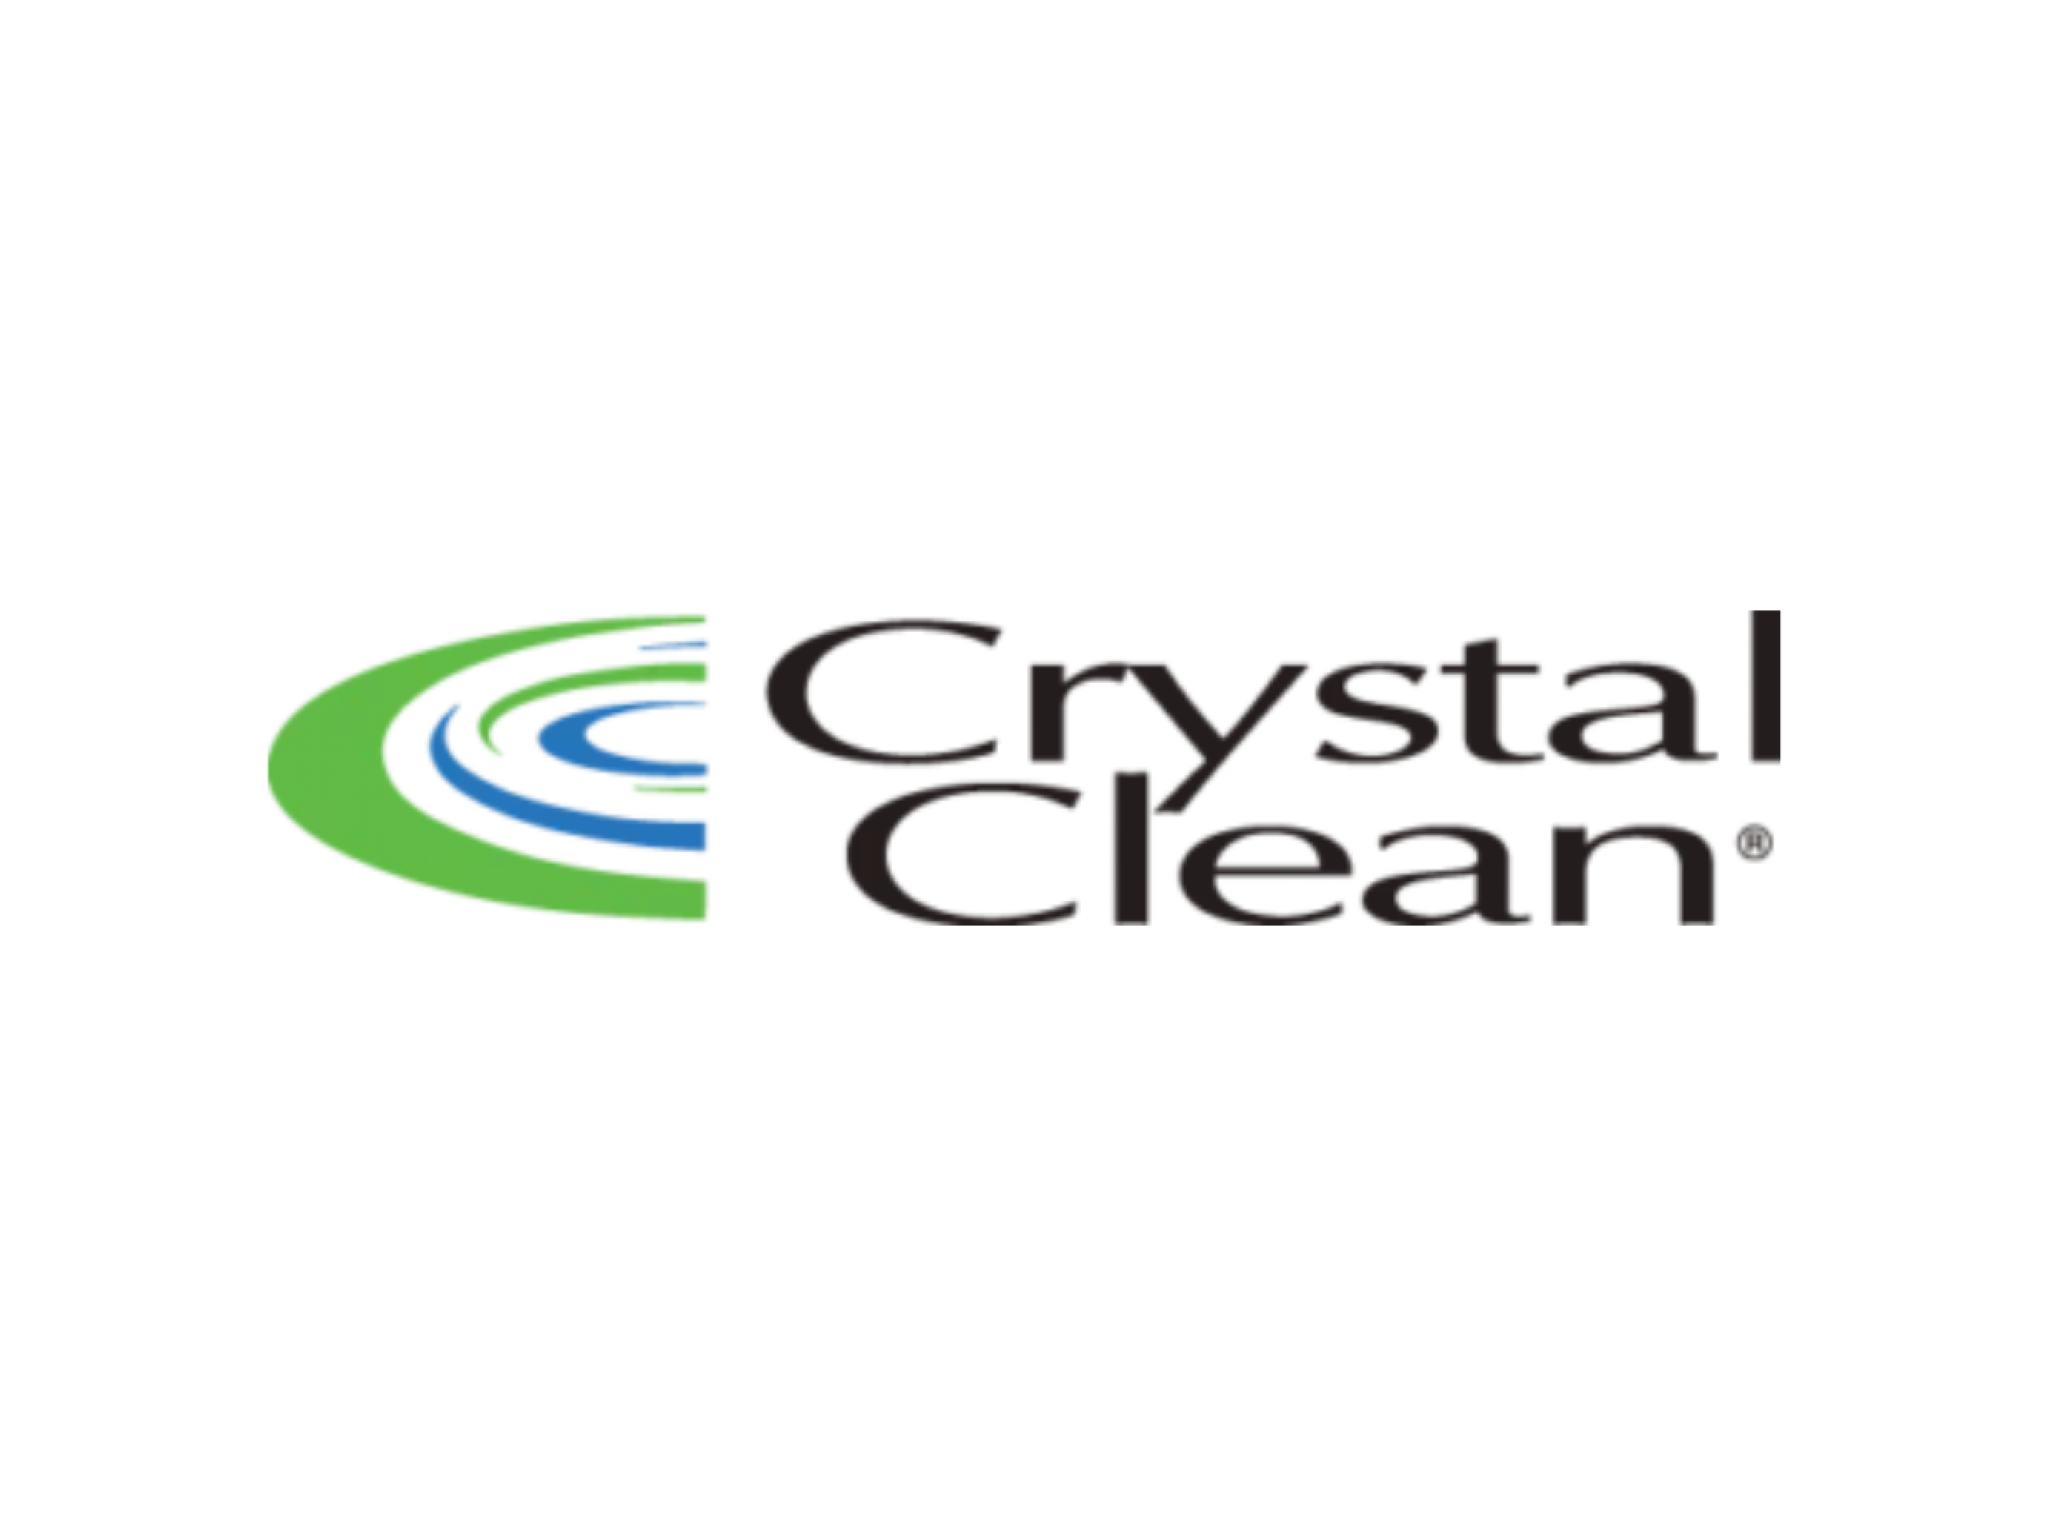  crystal-clean-goes-private-in-12b-cash-deal 